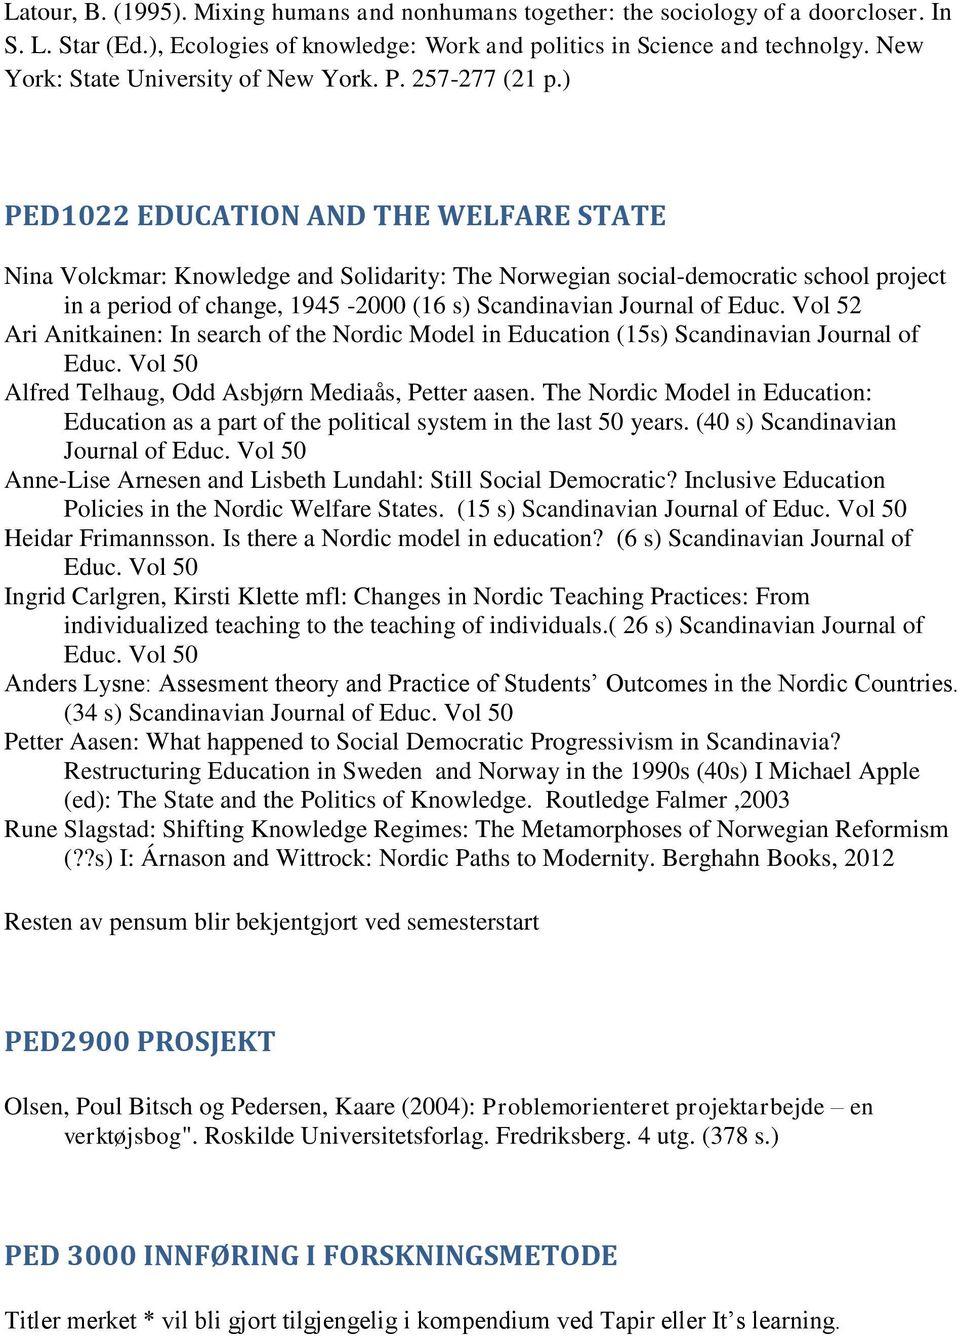 ) PED1022 EDUCATION AND THE WELFARE STATE Nina Volckmar: Knowledge and Solidarity: The Norwegian social-democratic school project in a period of change, 1945-2000 (16 s) Scandinavian Journal of Educ.